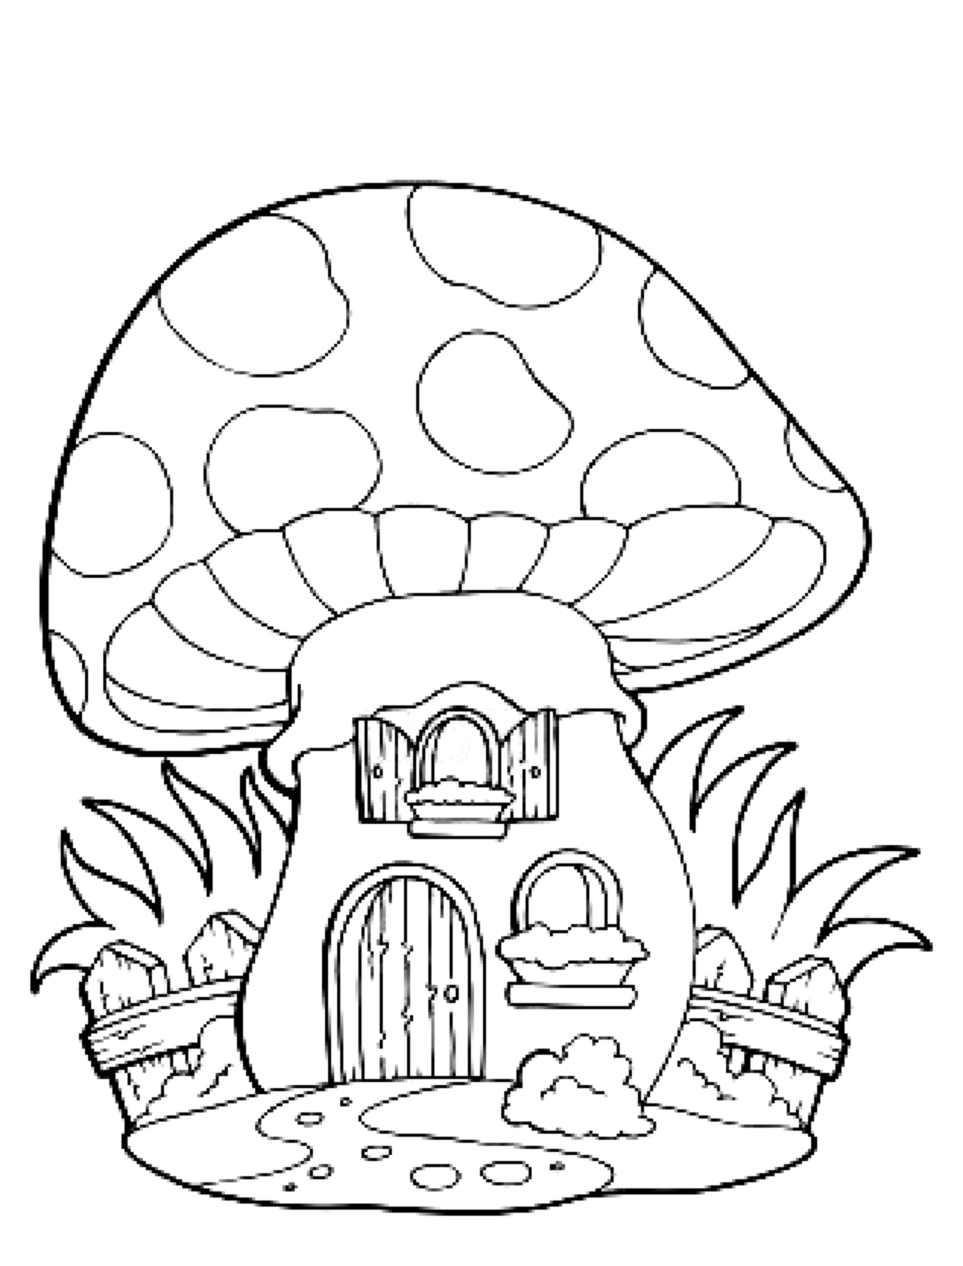 Beautiful Mushrooms coloring page to print and color